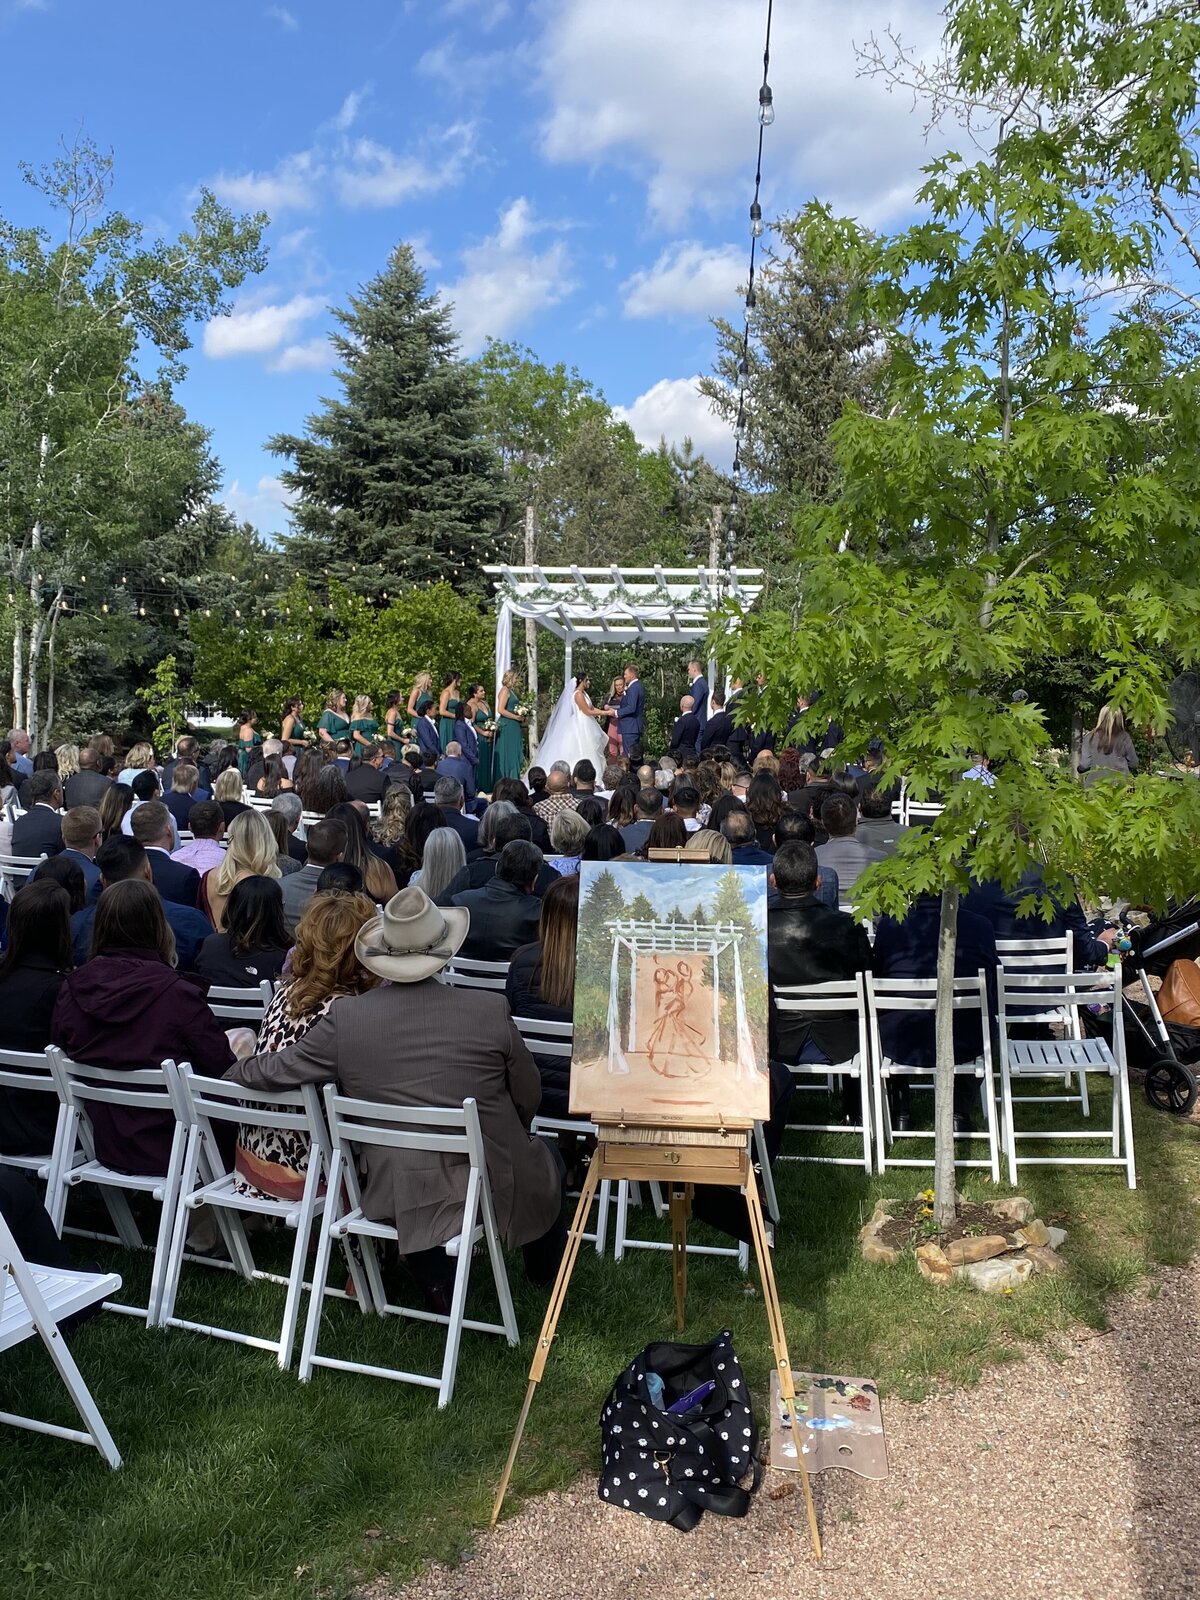 Denver's premier live wedding painter, Olivia Andruss, takes a snapshot of her easel and work in progress during the ceremony at Church Ranch Events Center